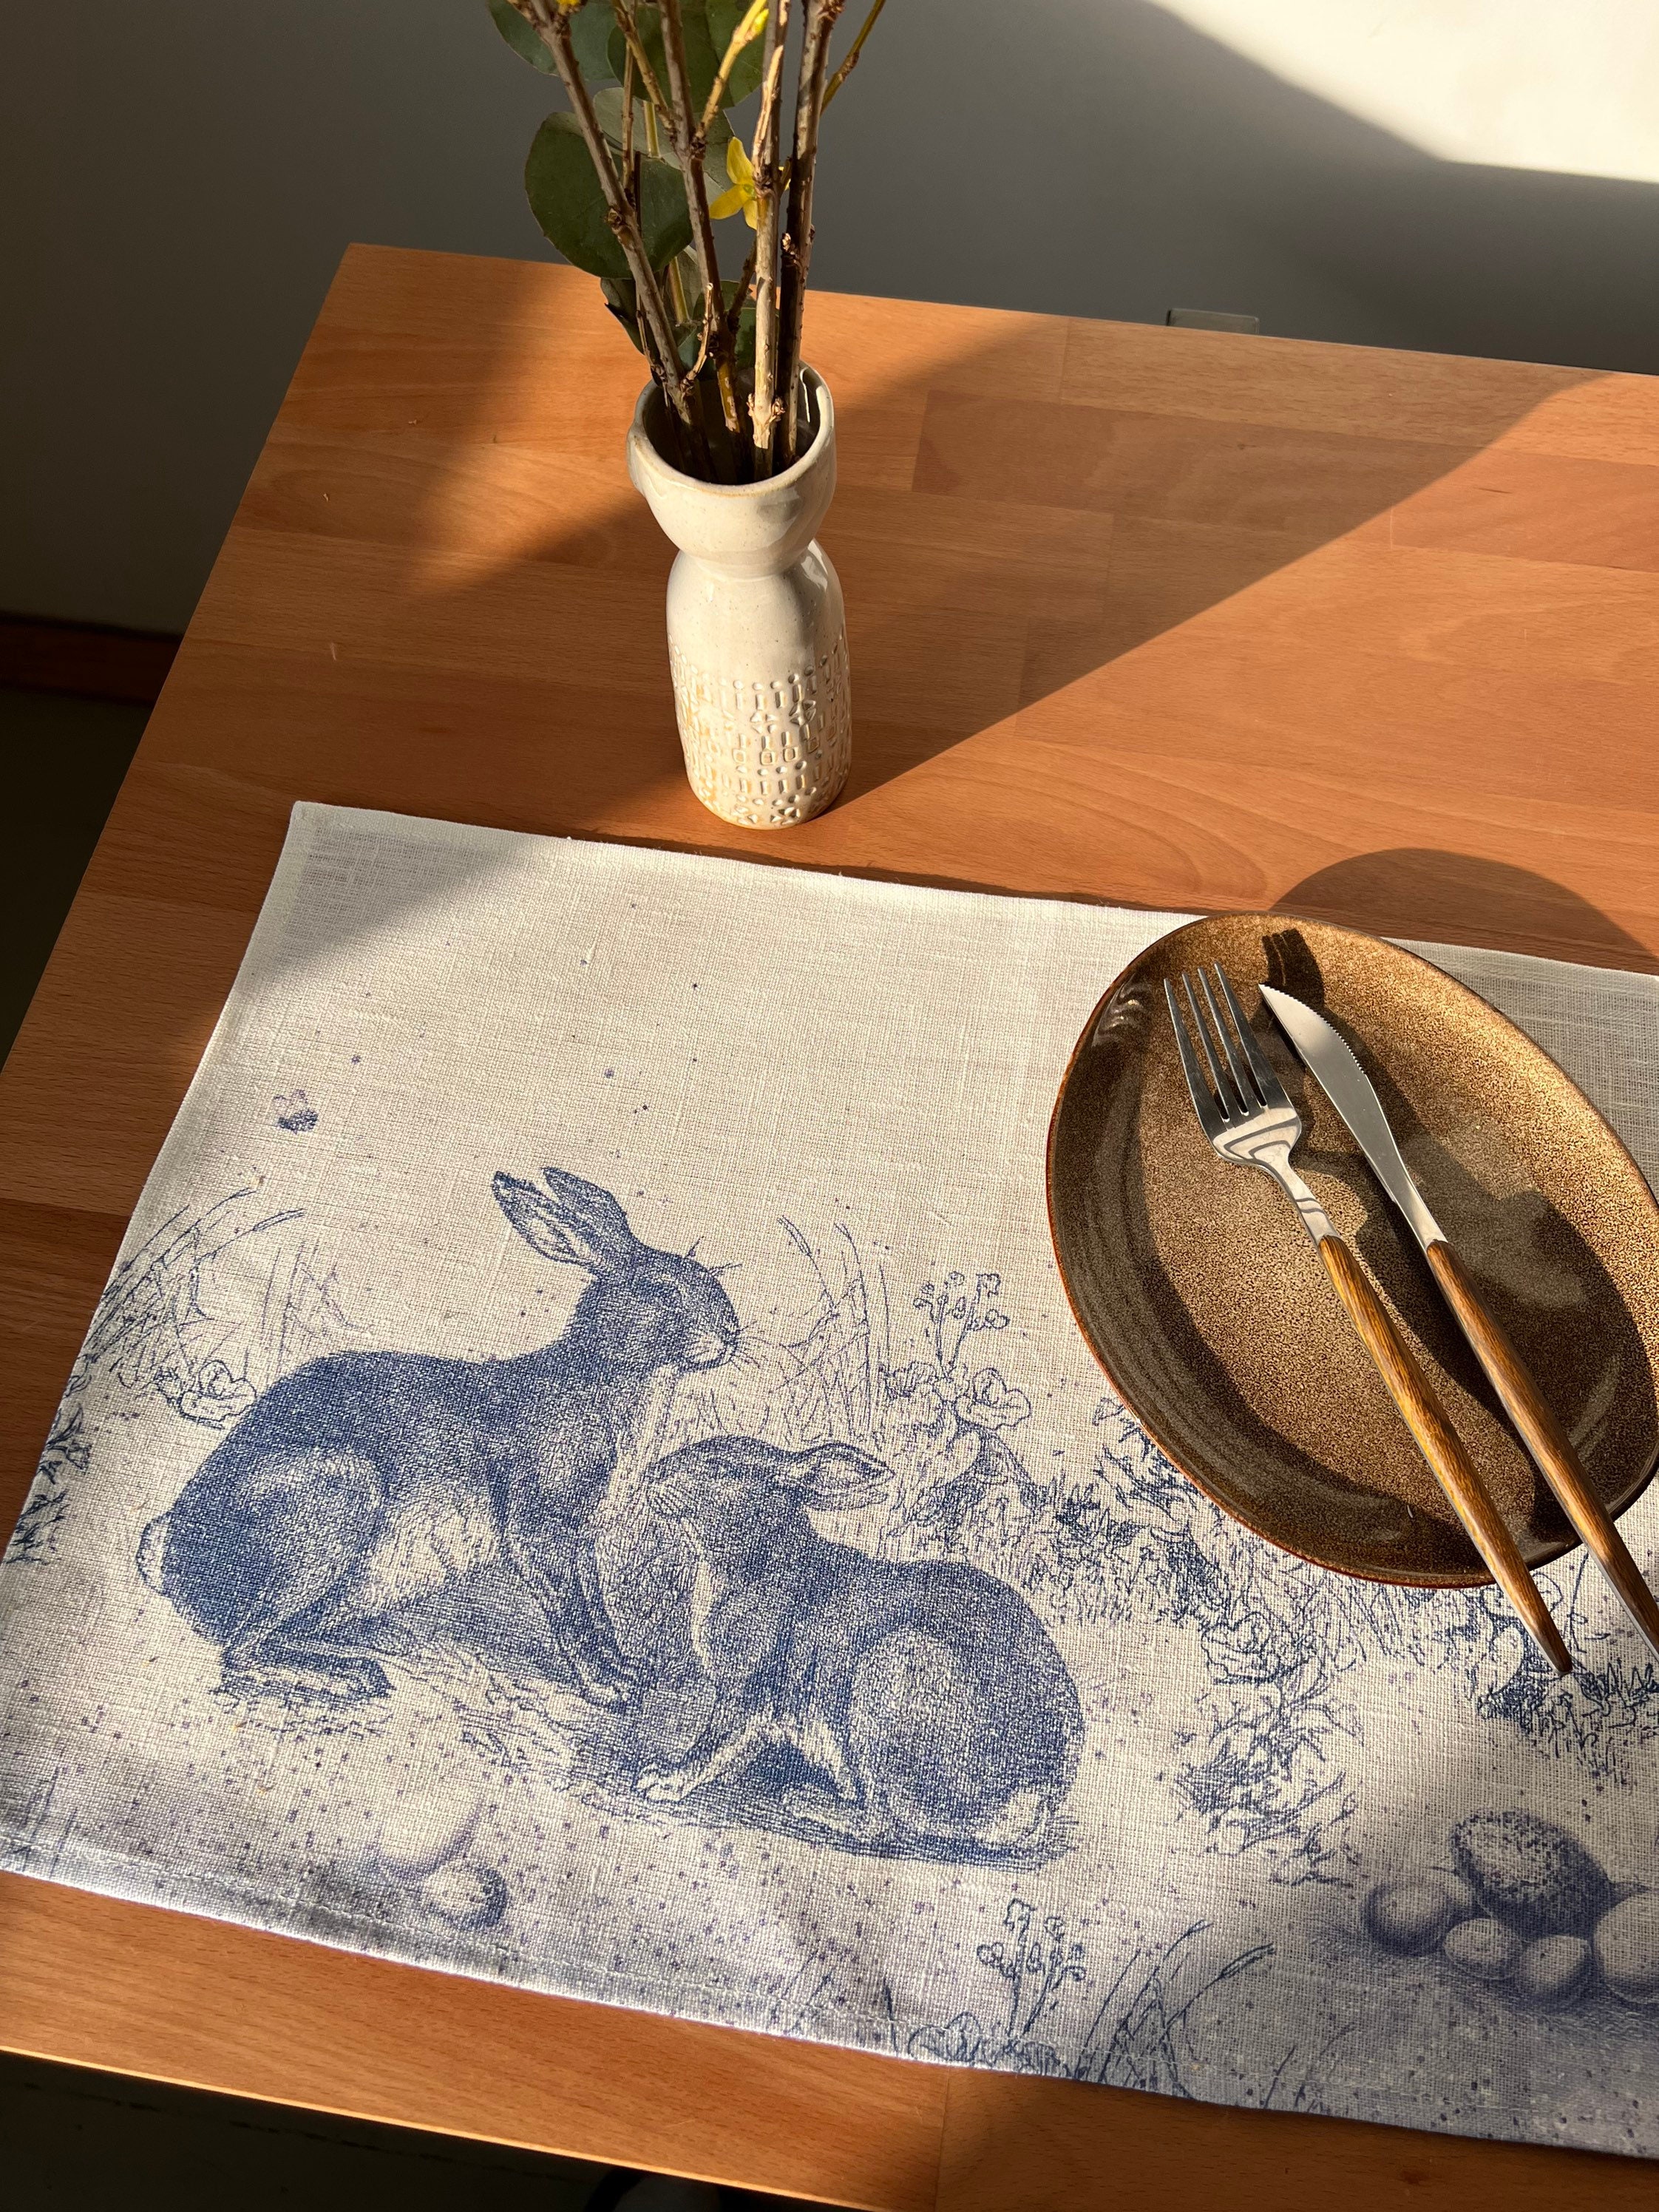 AGONA Easter Cute Bunny Rabbit Flowers Butterfly Placemats Set of 6 Burlap Table Mats Heat Resistant Non-Slip Table Place Mats Washable Anti-Skid Placemat for Dining Table Kitchen Home Decor